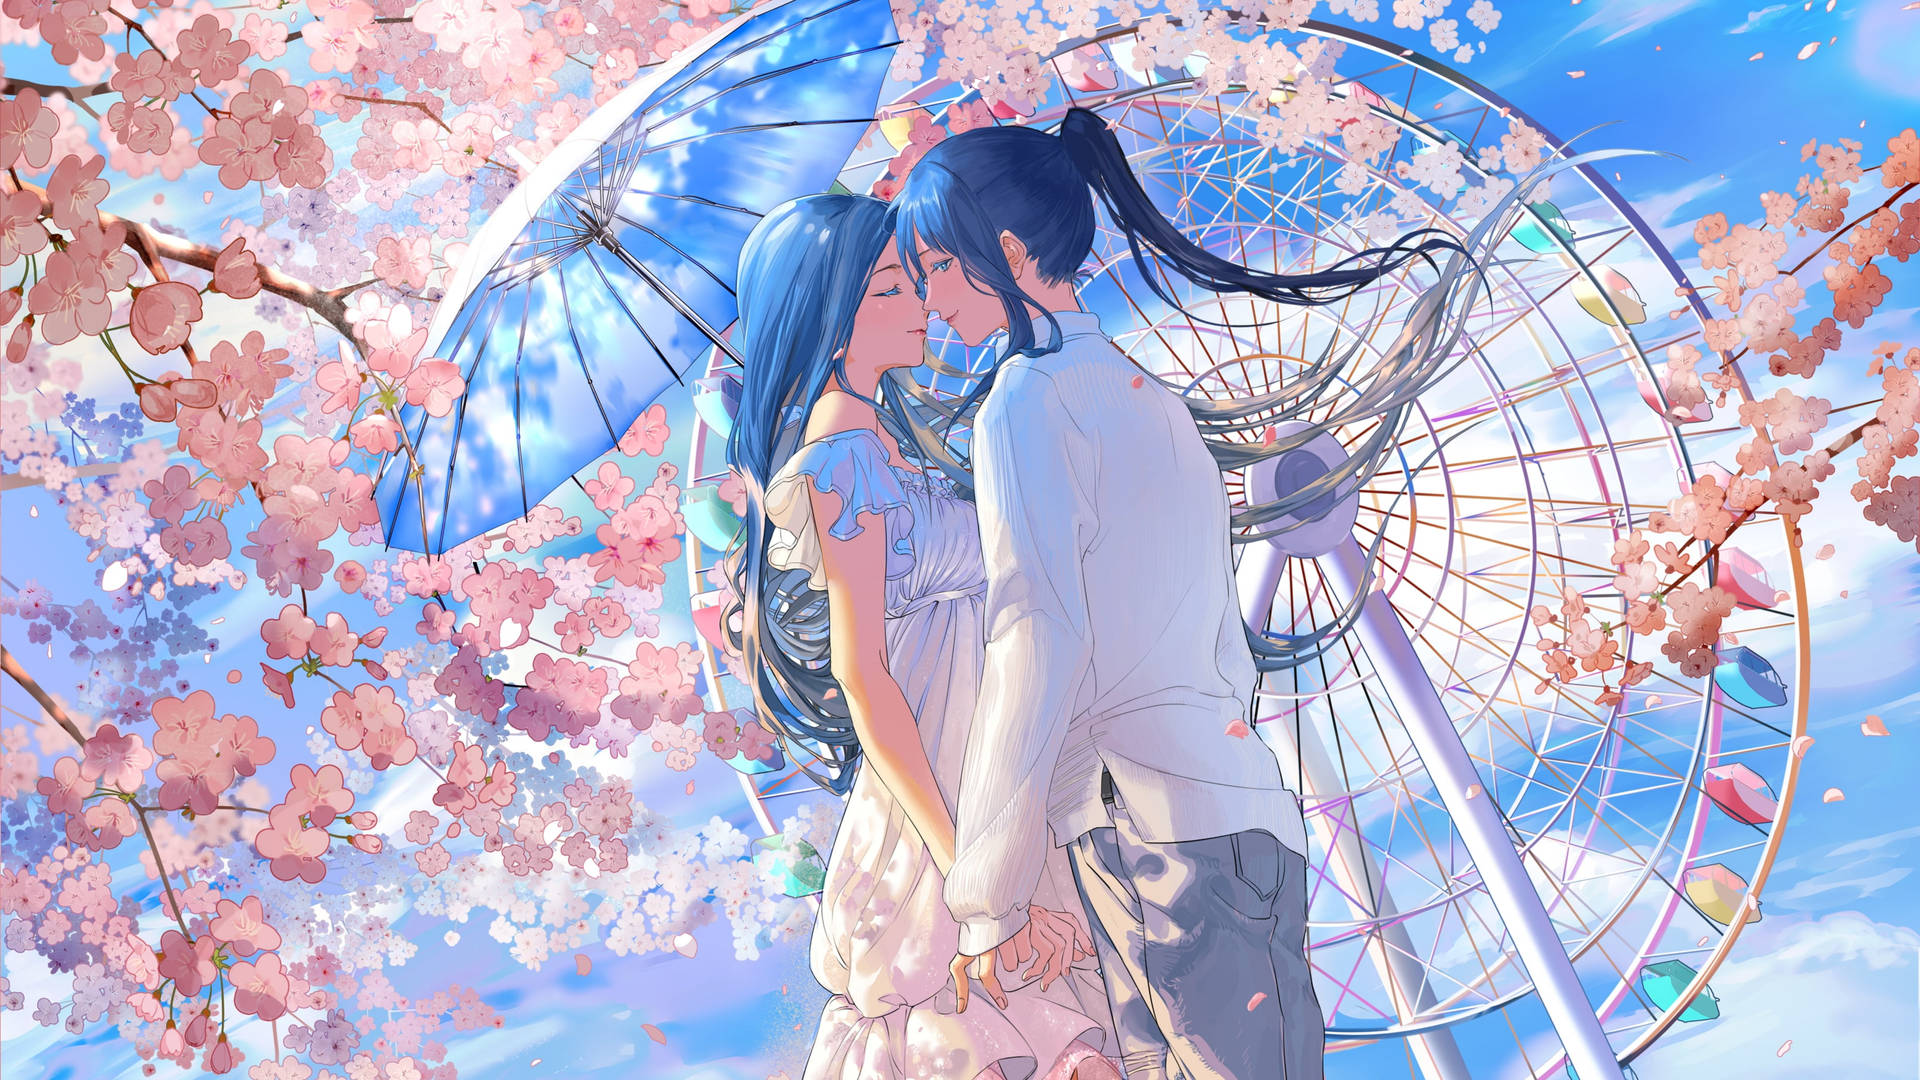 Cute Anime Couple With Ferris Wheel Background